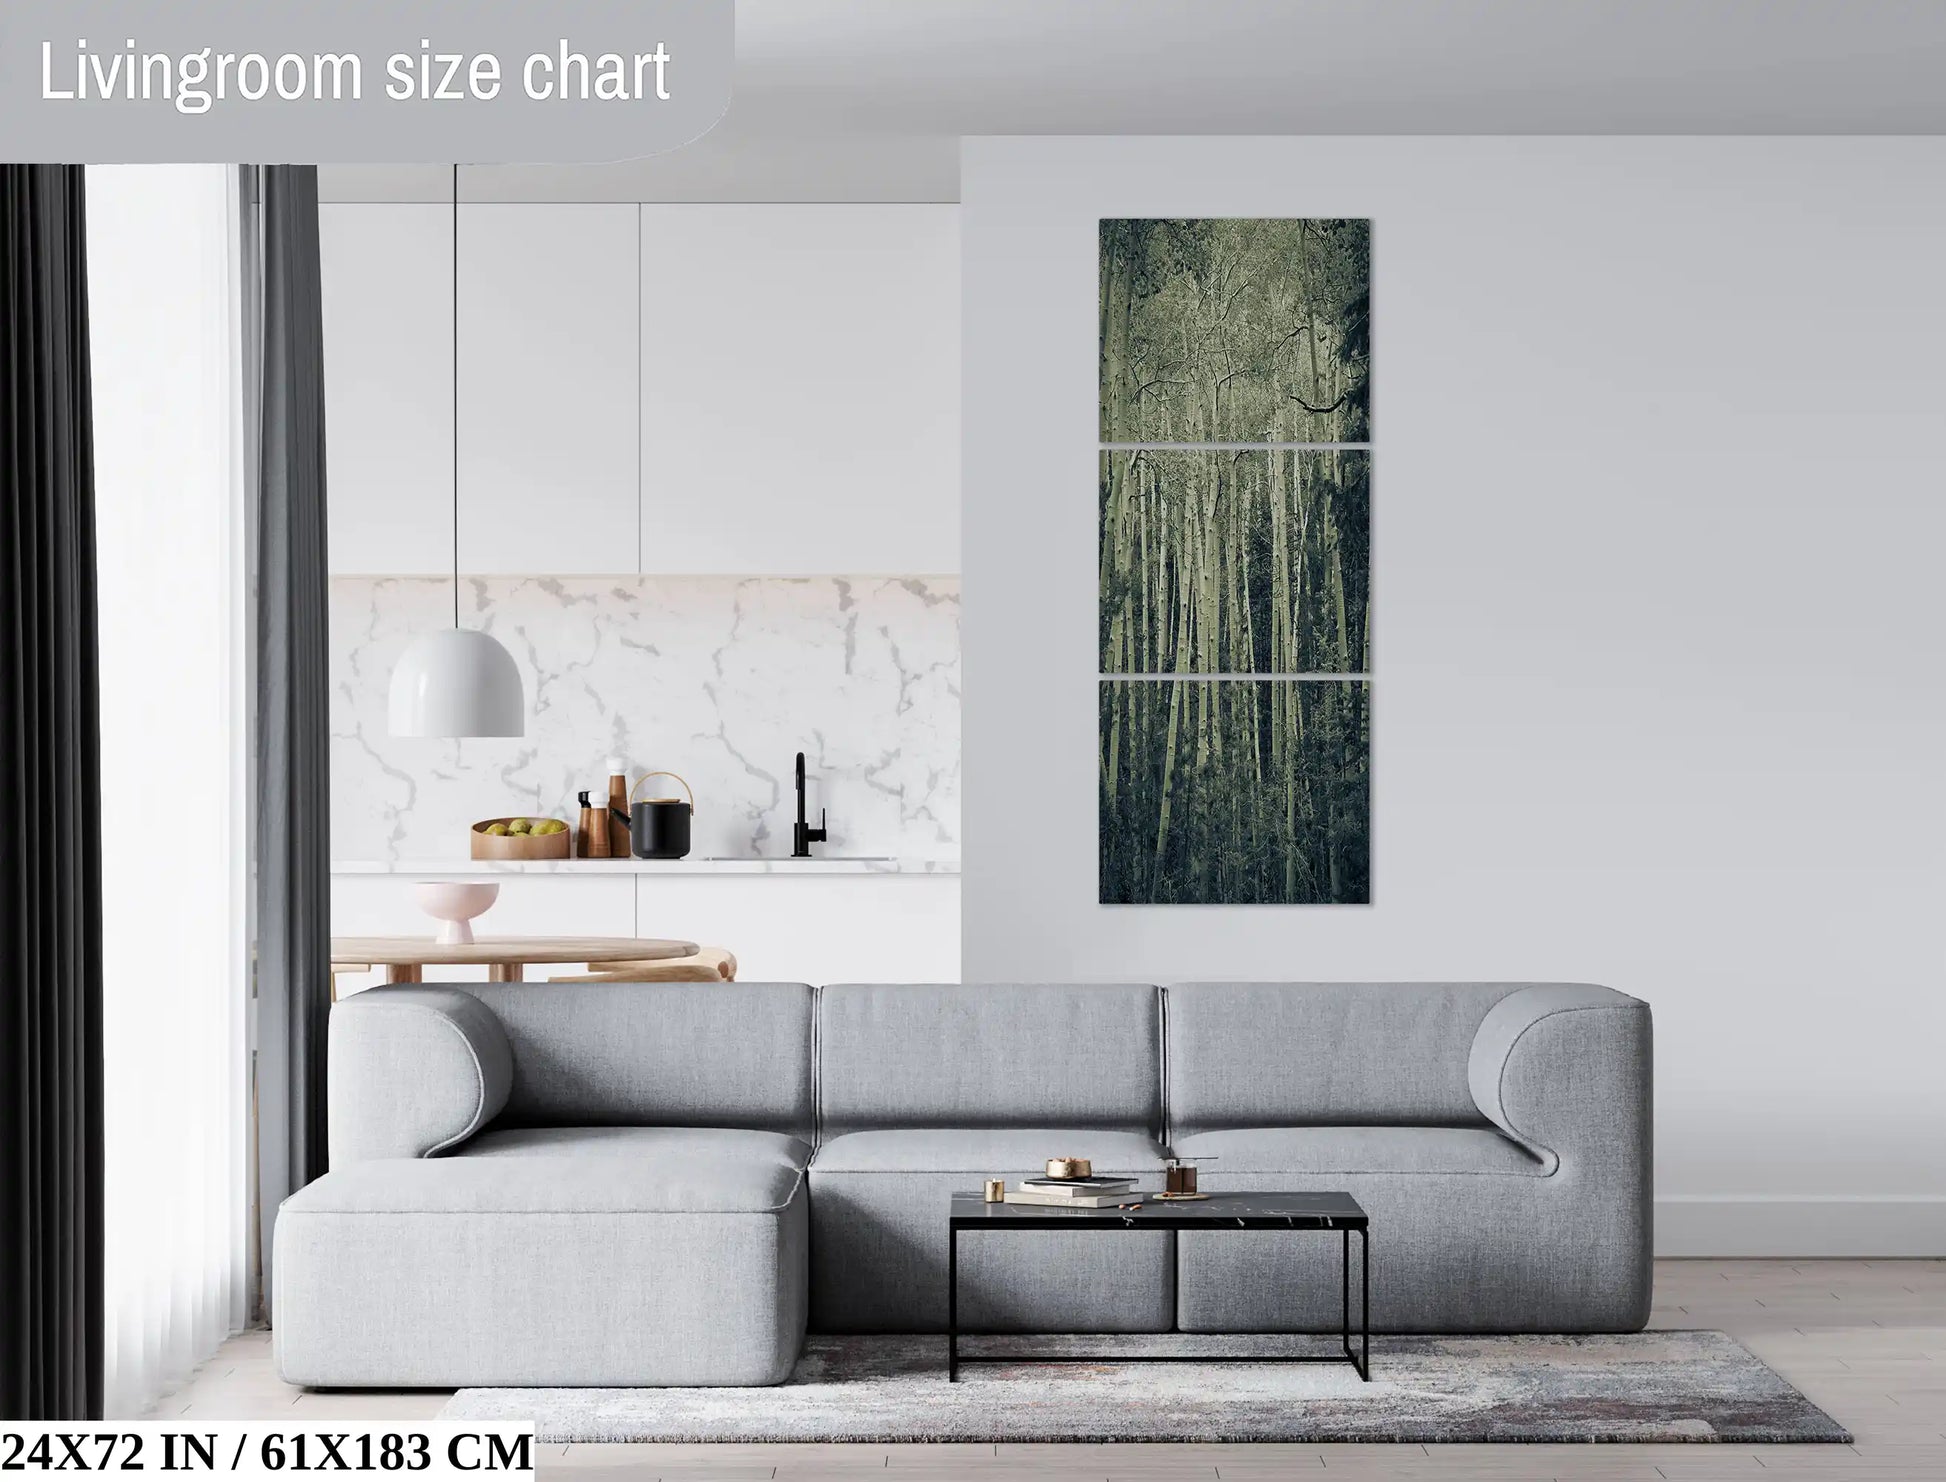 A 3-piece triptych 24x72 inch vertically long canvas print in a living room, displaying a triptych of duotone aspen birch trees, enhancing the room with a supernatural ambiance.